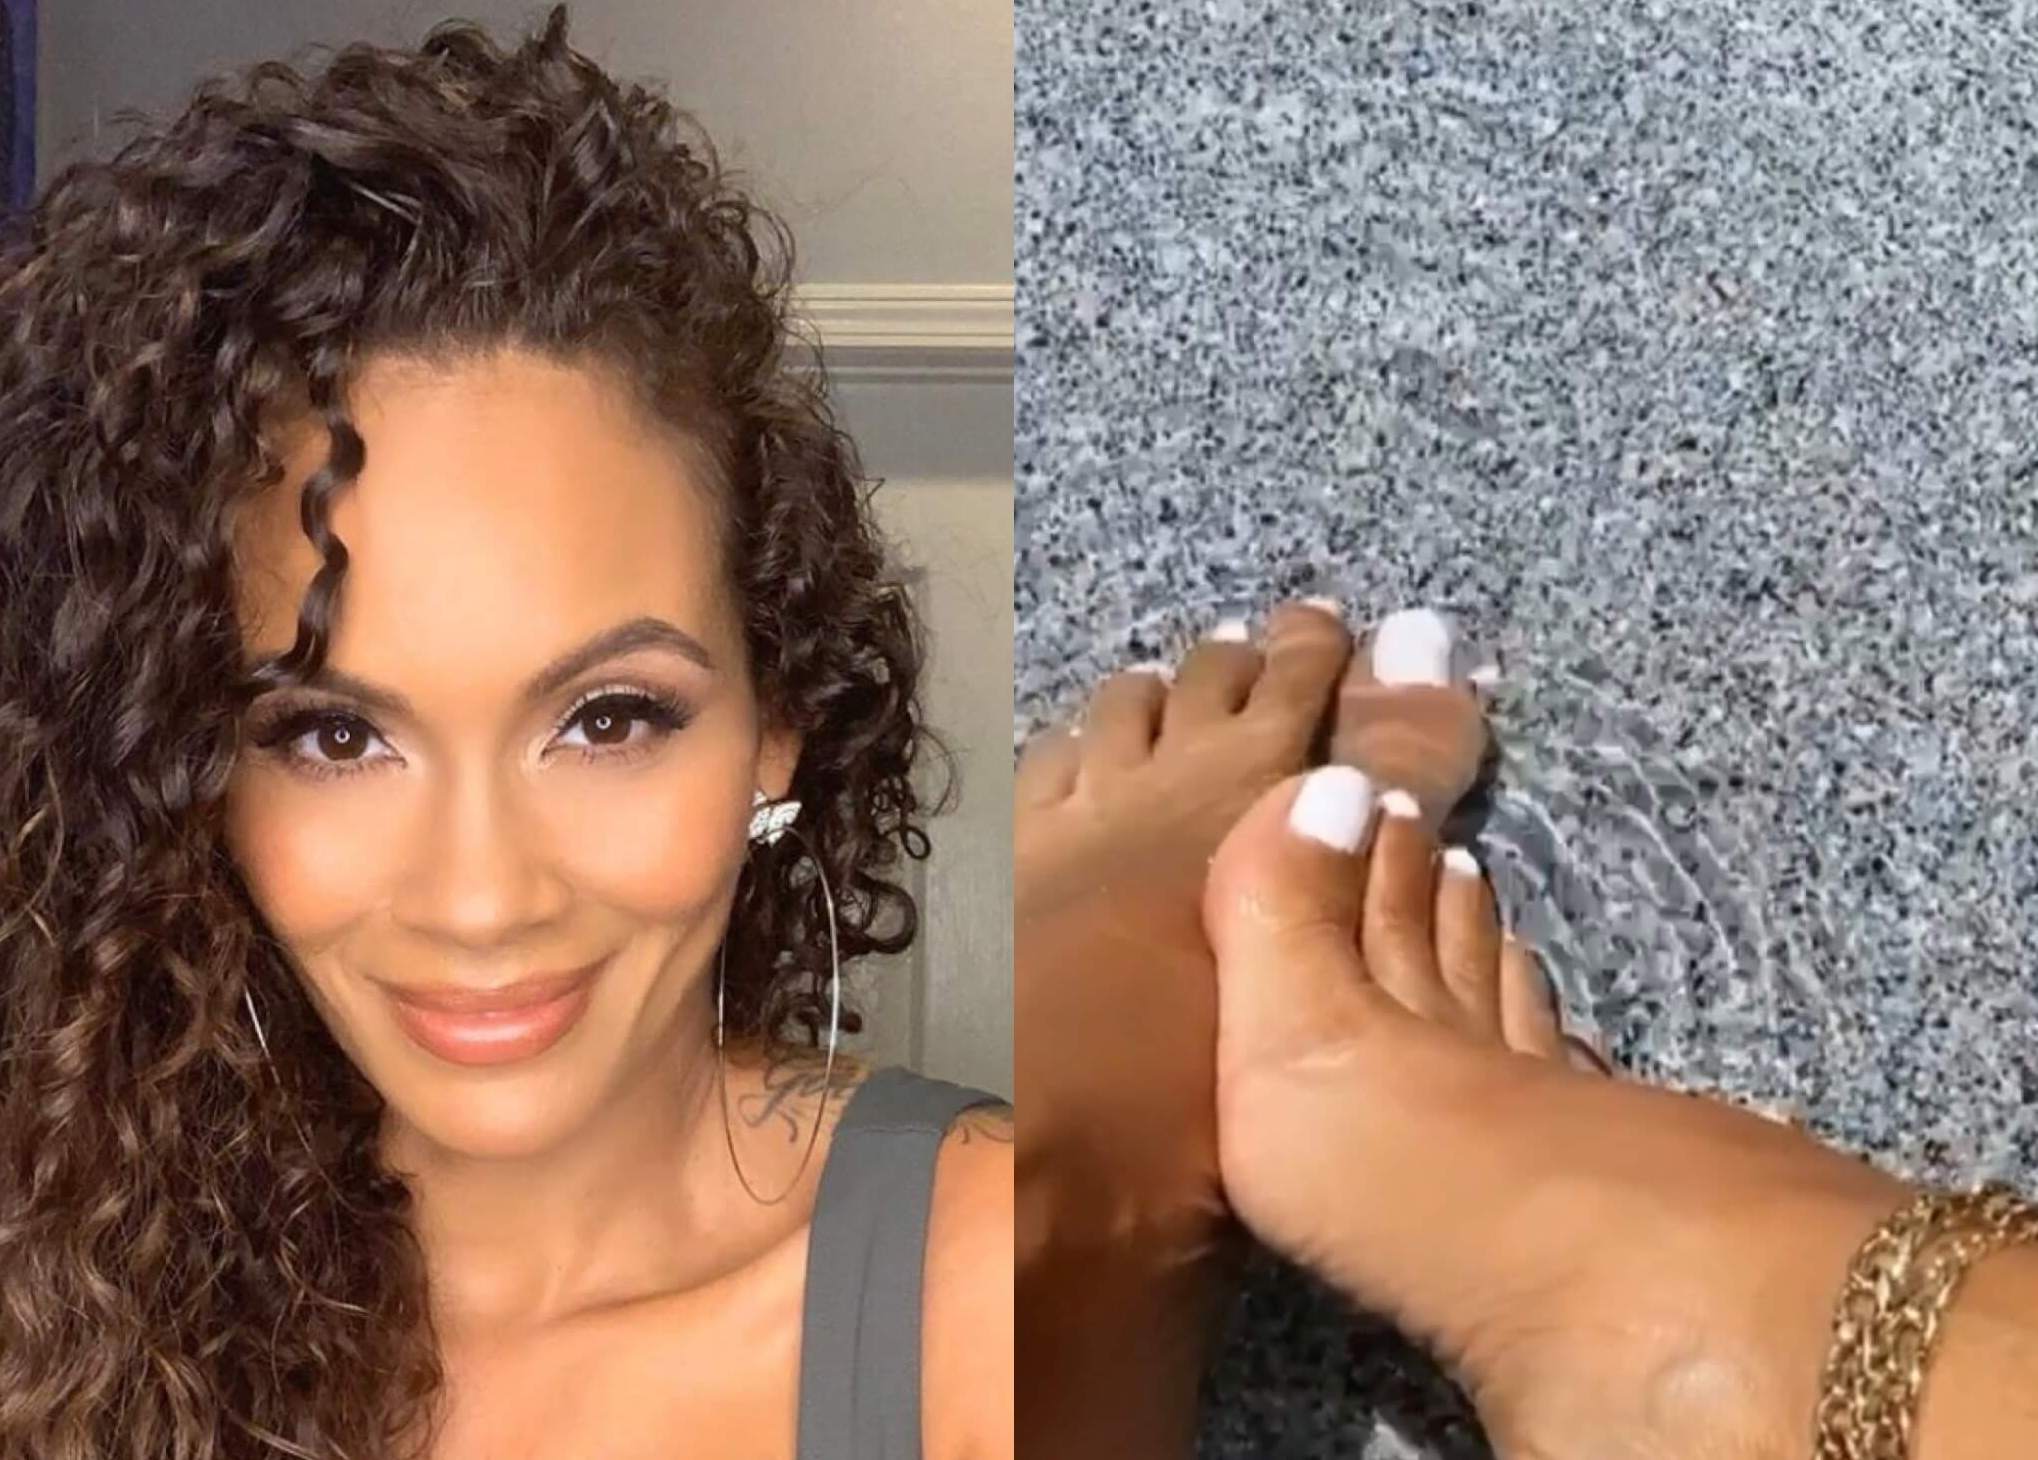 Only fans foot